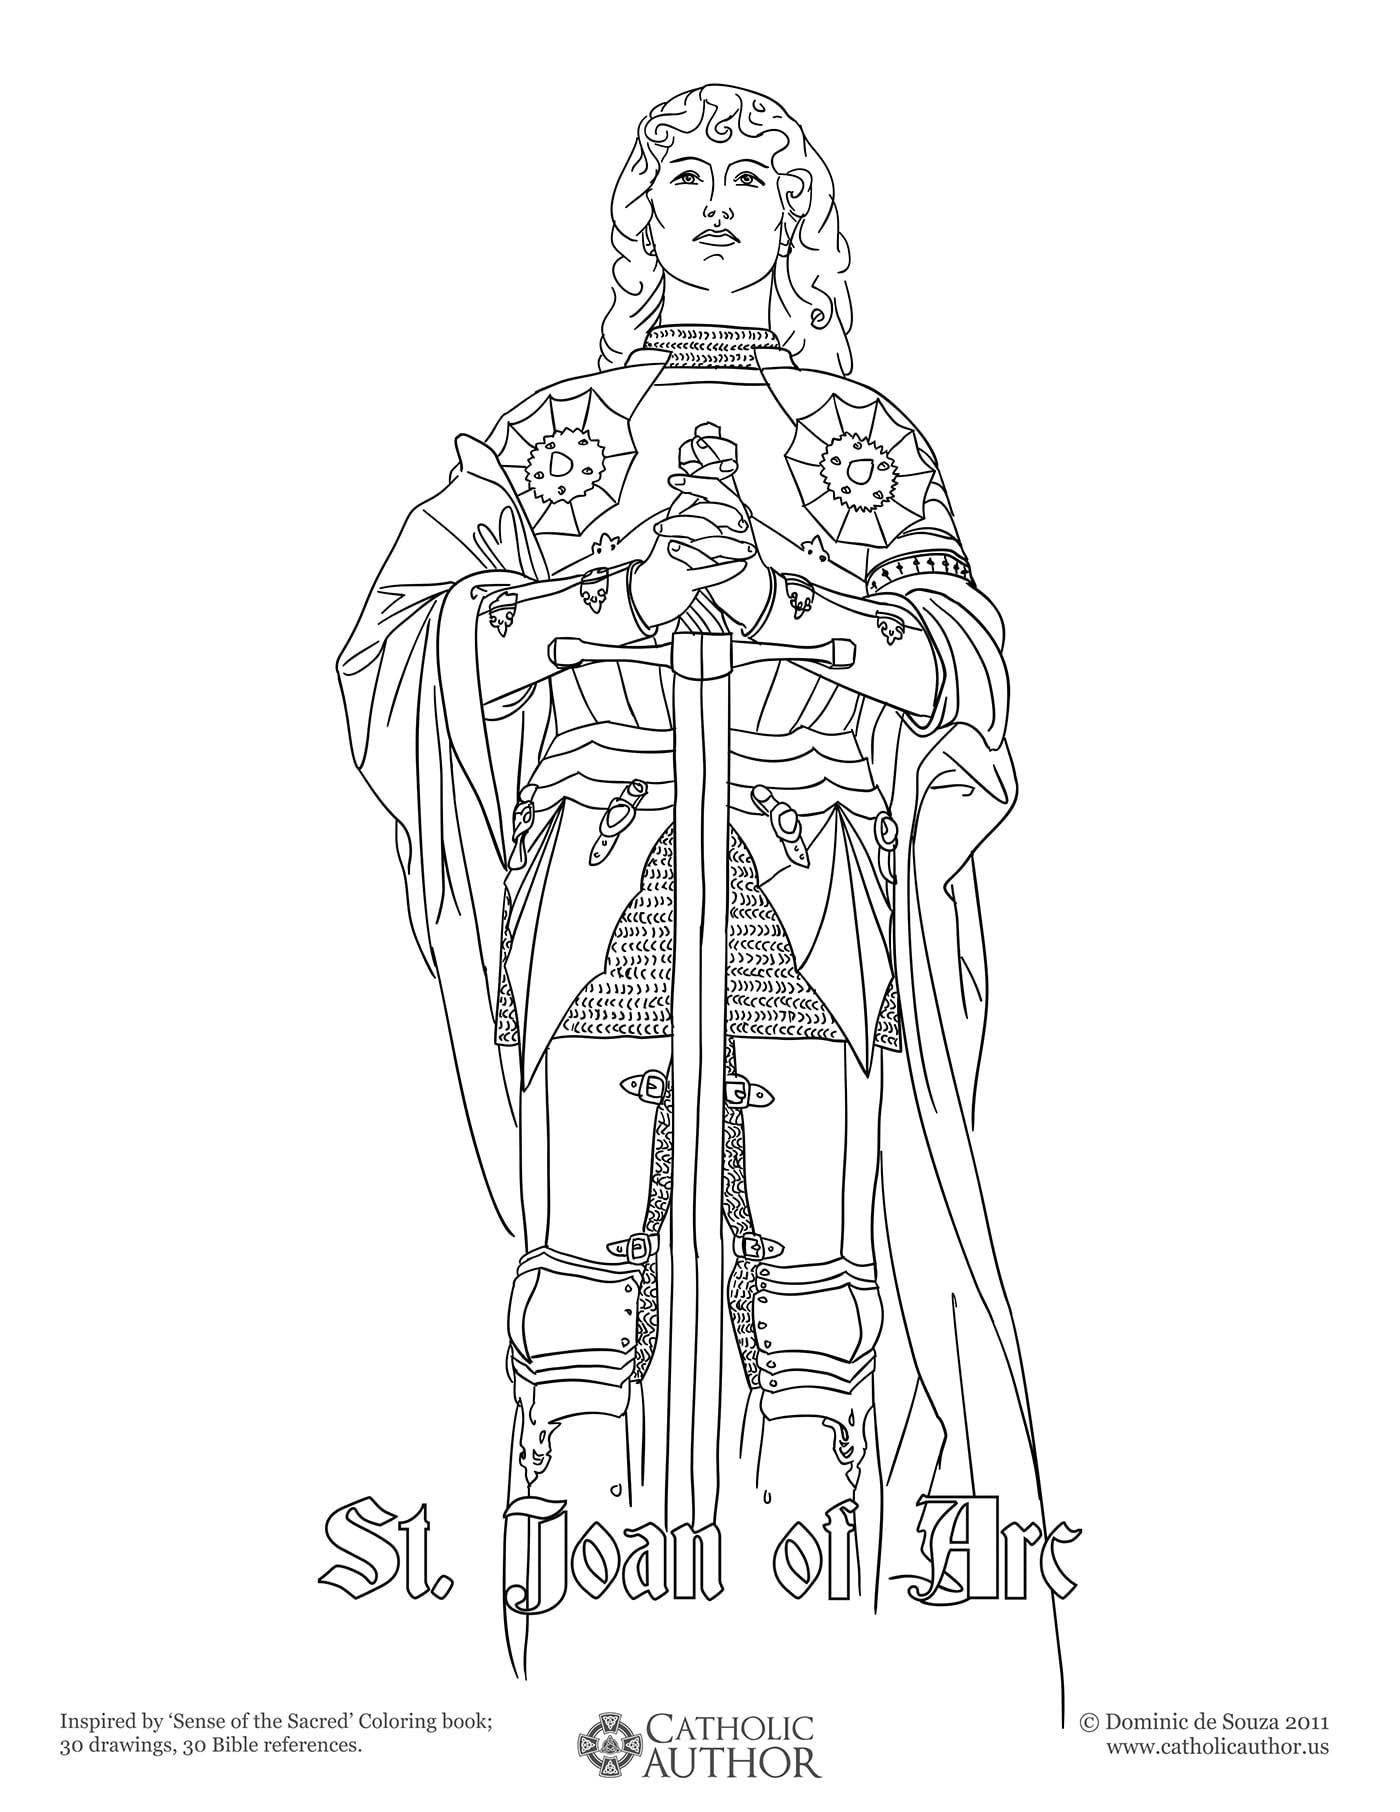 20 Free Hand Drawn Catholic Coloring Pictures » CatholicViral